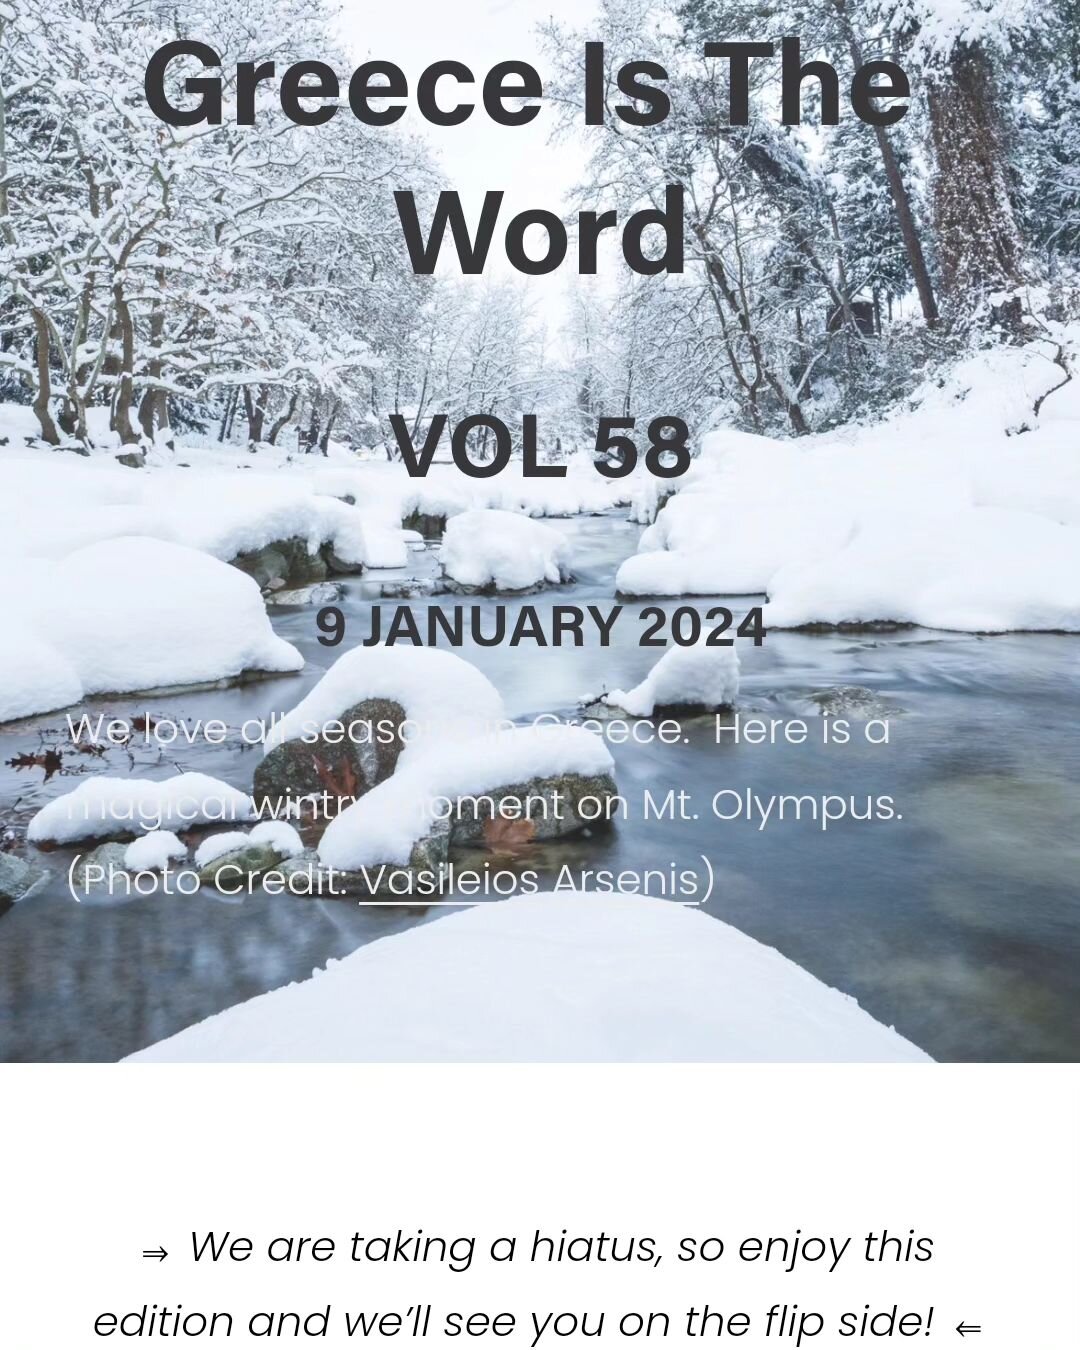 Our last edition of Greece Is The Word before we take a hiatus was published yesterday!  Check it out: https://www.greeceistheword.co/volume-58

Photo credit: Vasileios Arsenis

#mtolympus #winteringreece #snowingreece #greece #greeceistheword